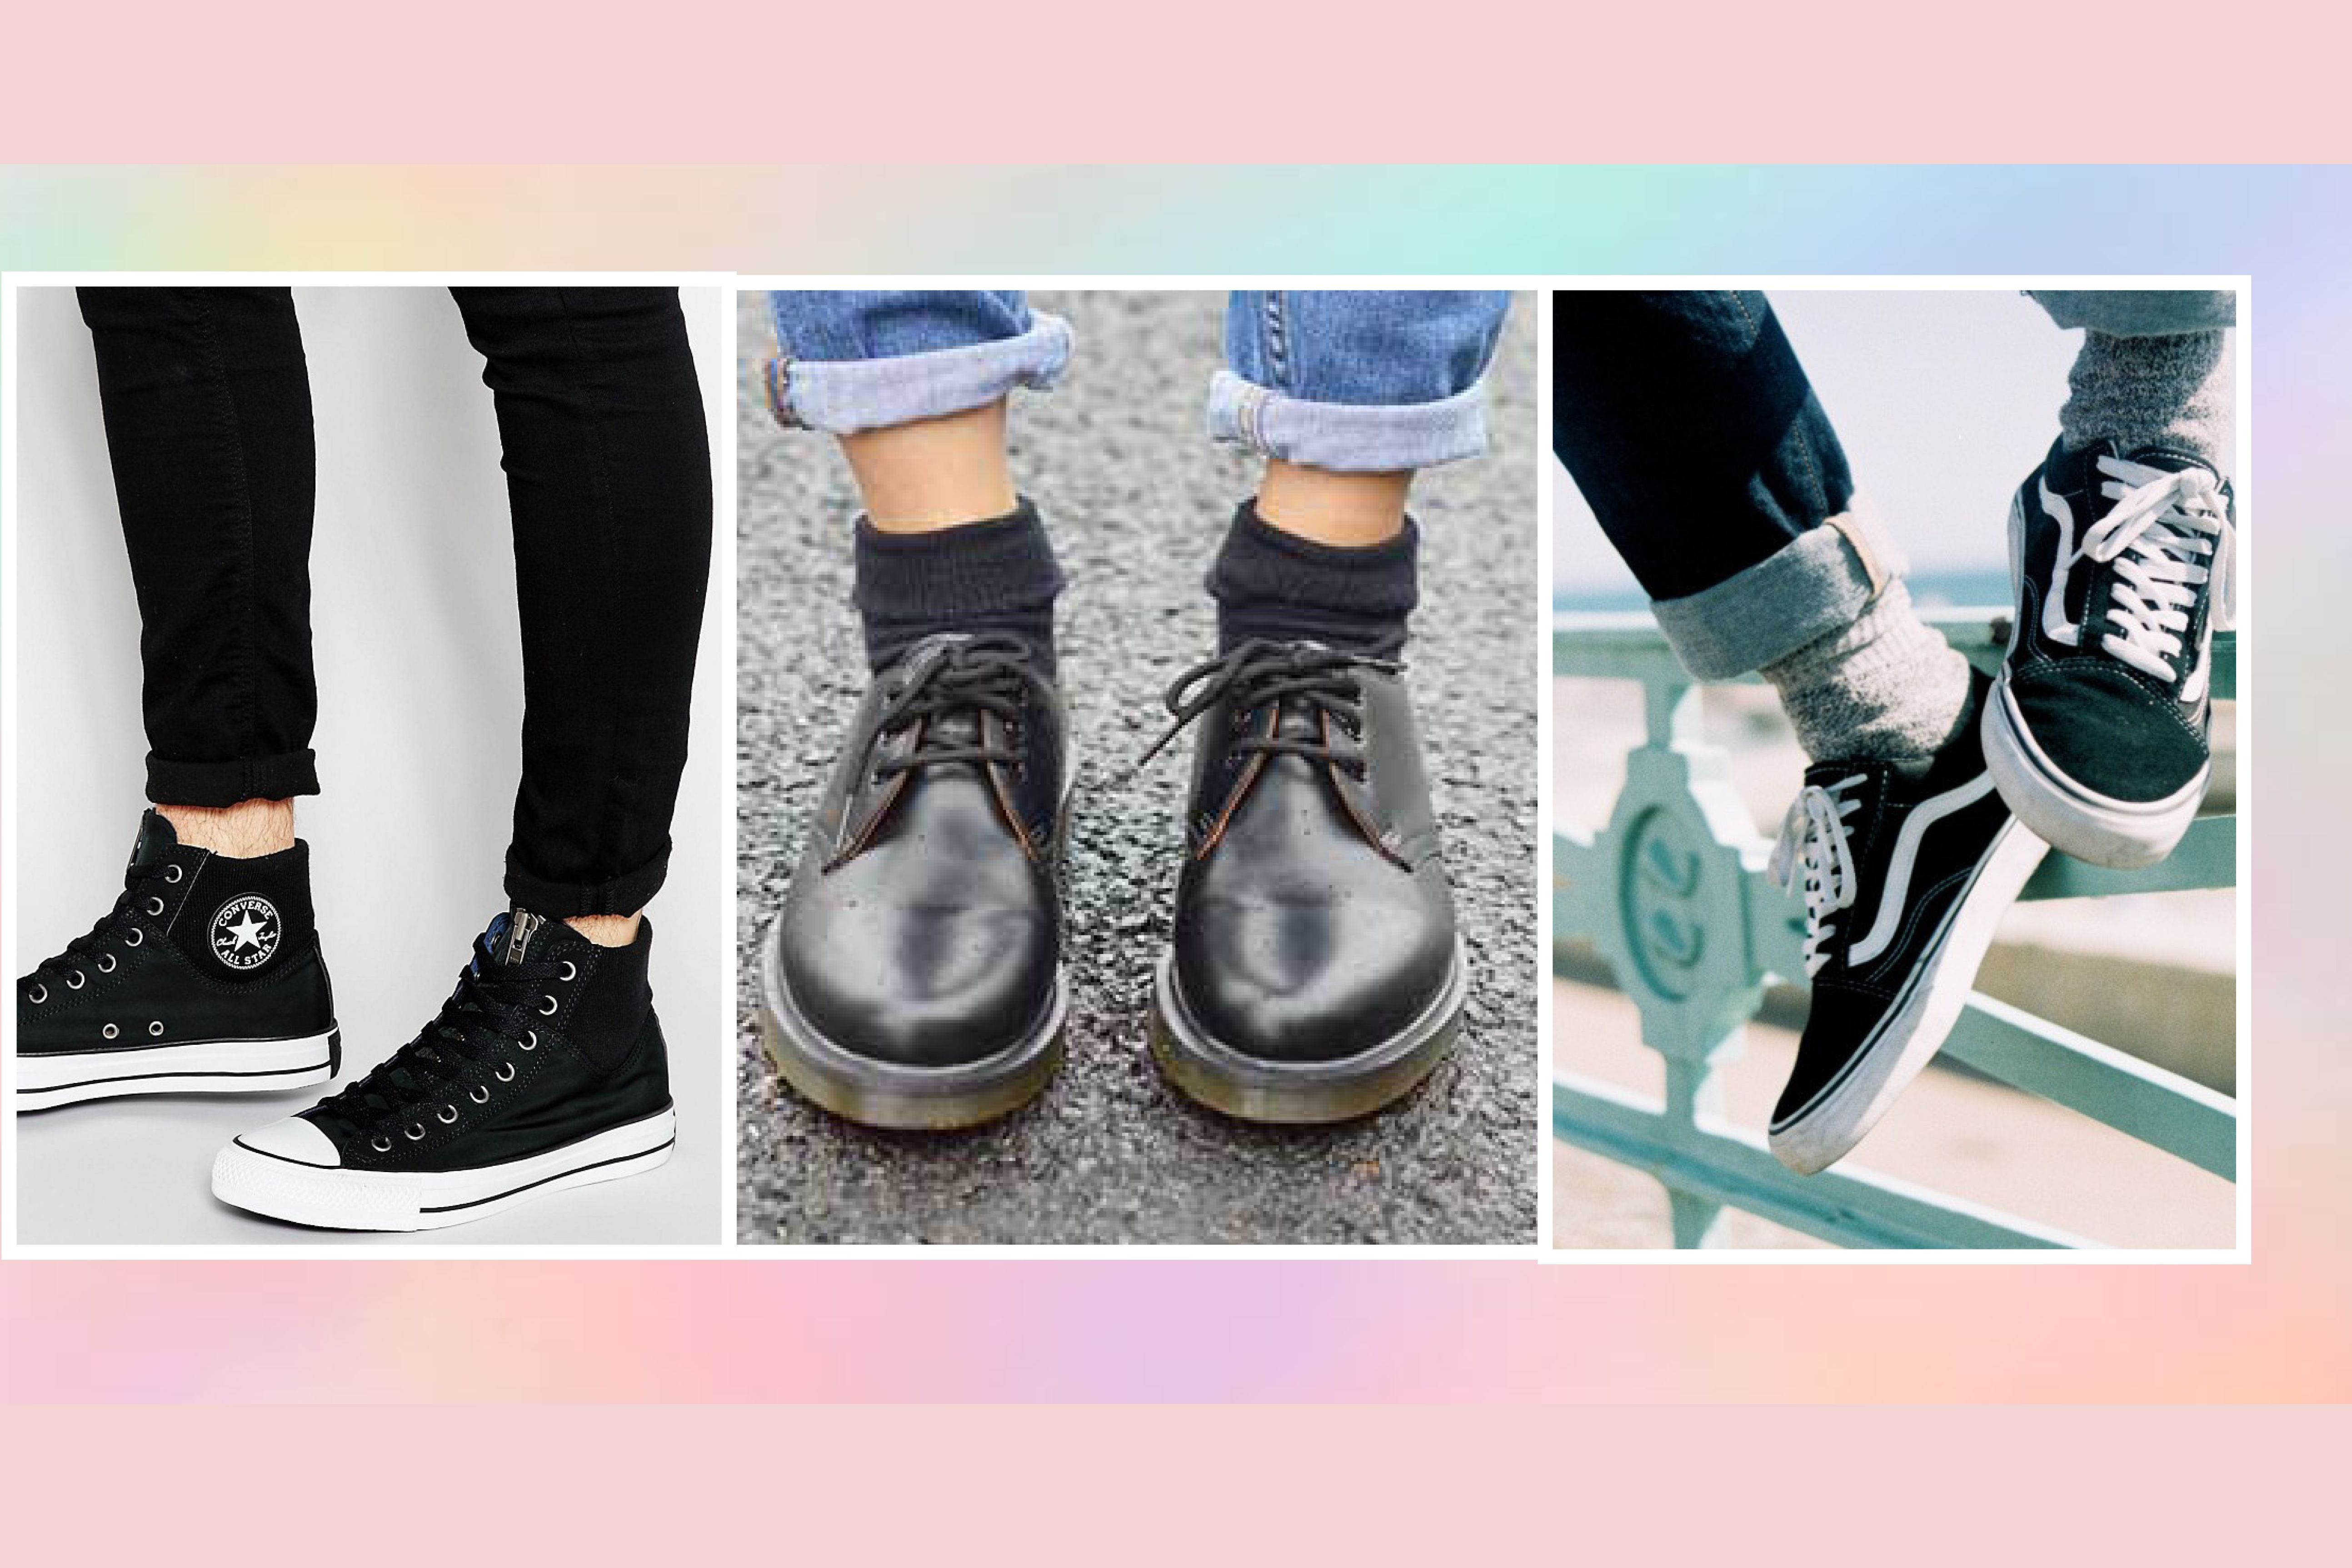 QUIZ: Are You More Converse, Vans, Or Doc Martens?